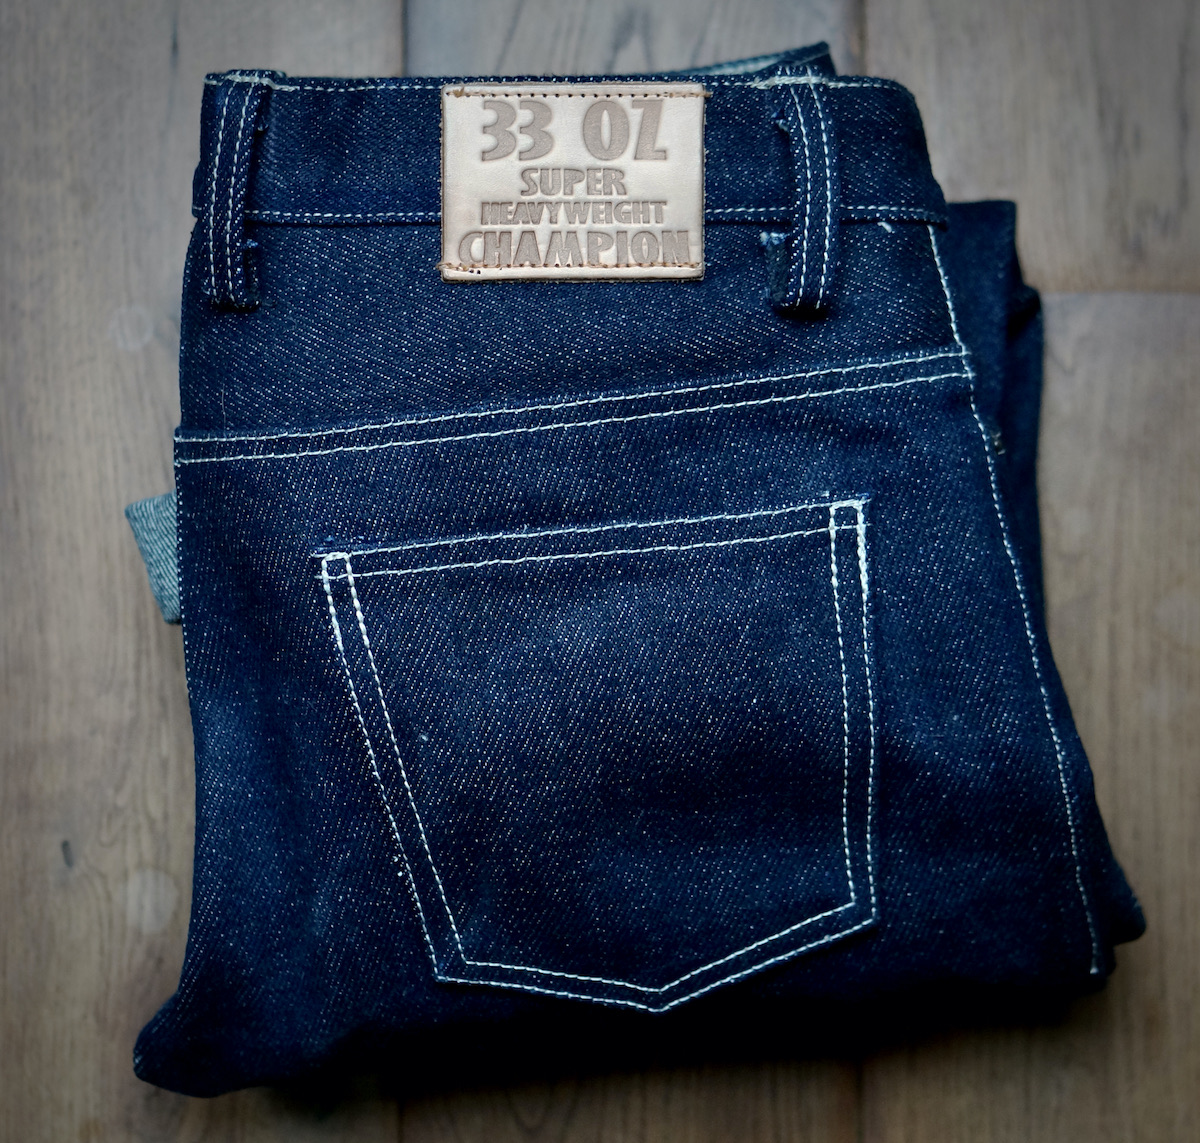 Denim Brands Address the Need for Adaptive Jeans